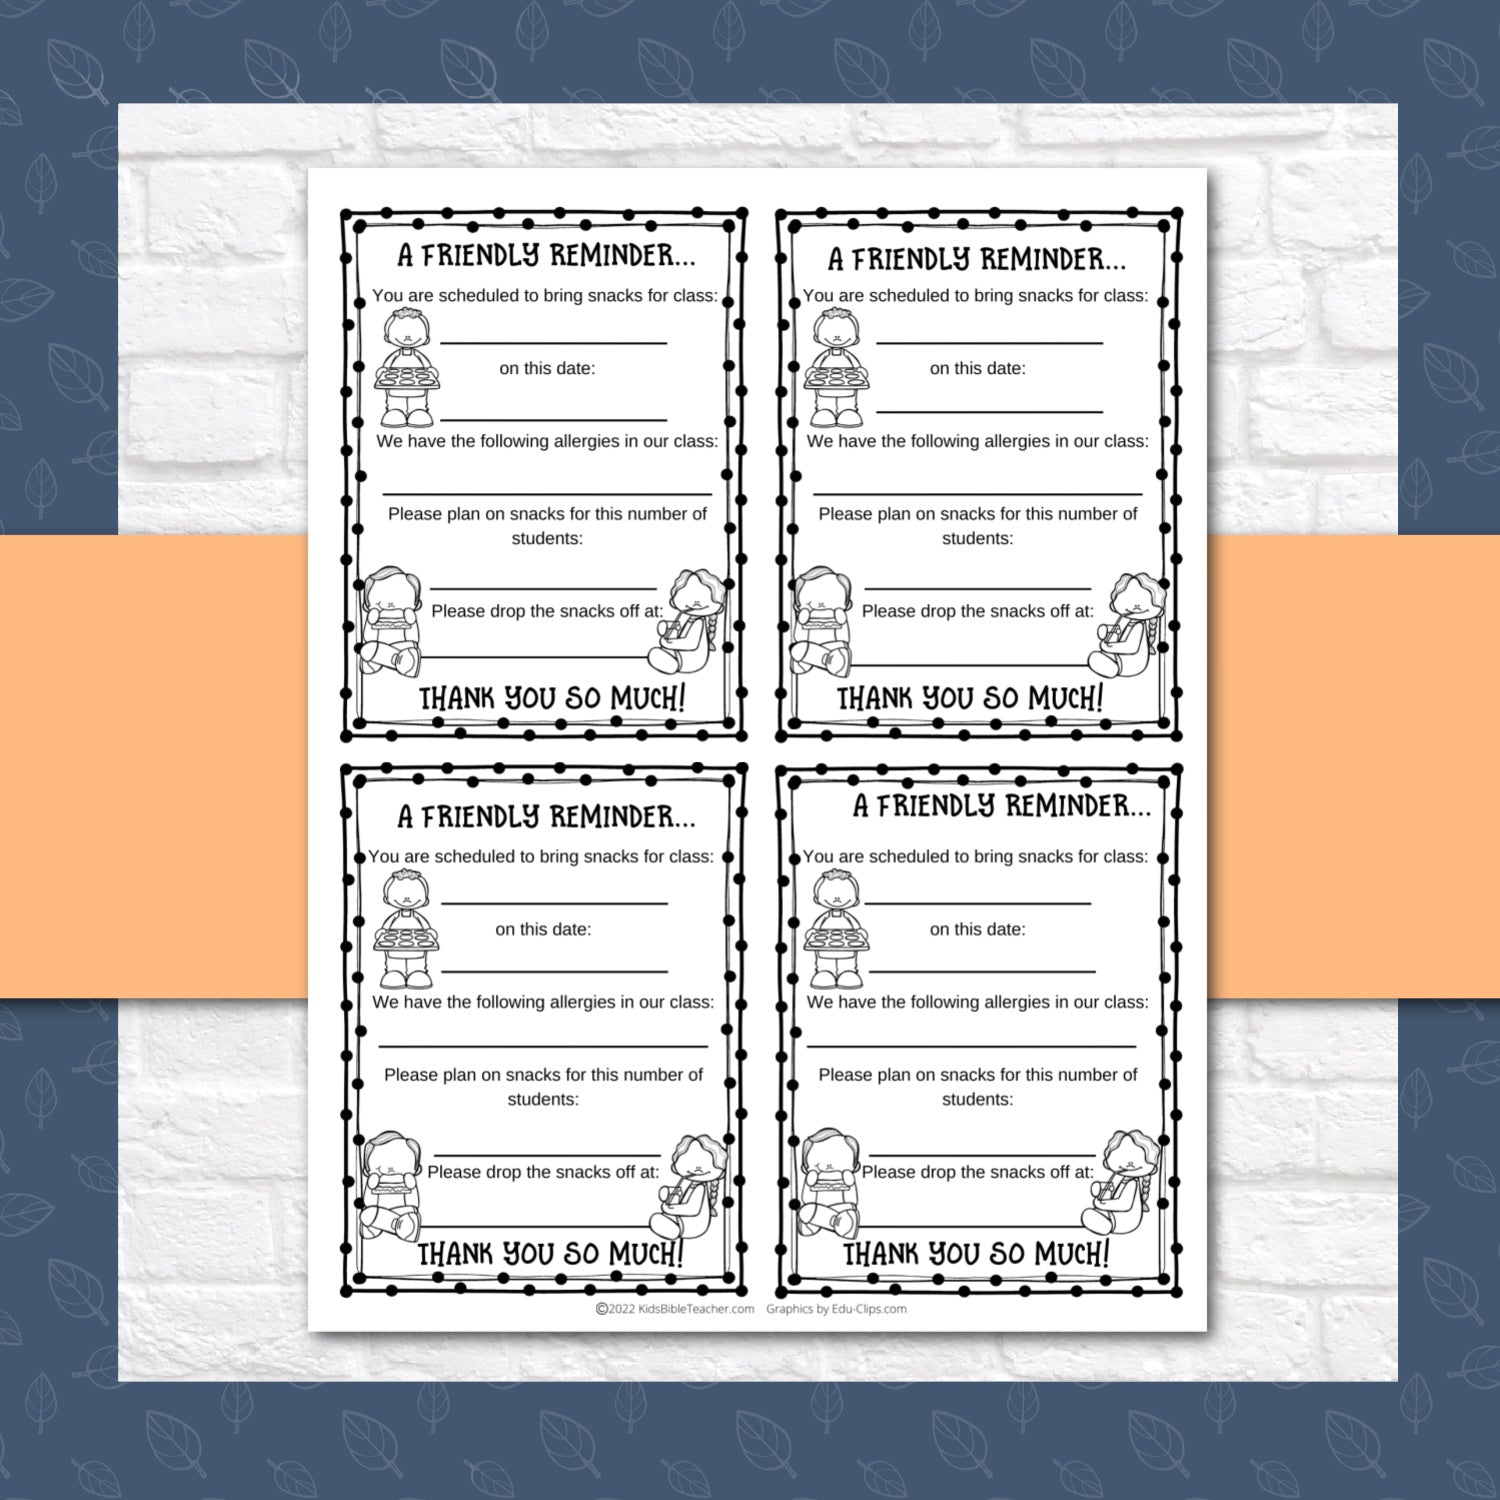 Weekly Classroom Snack Forms for Sunday School or Weekly Bible Club